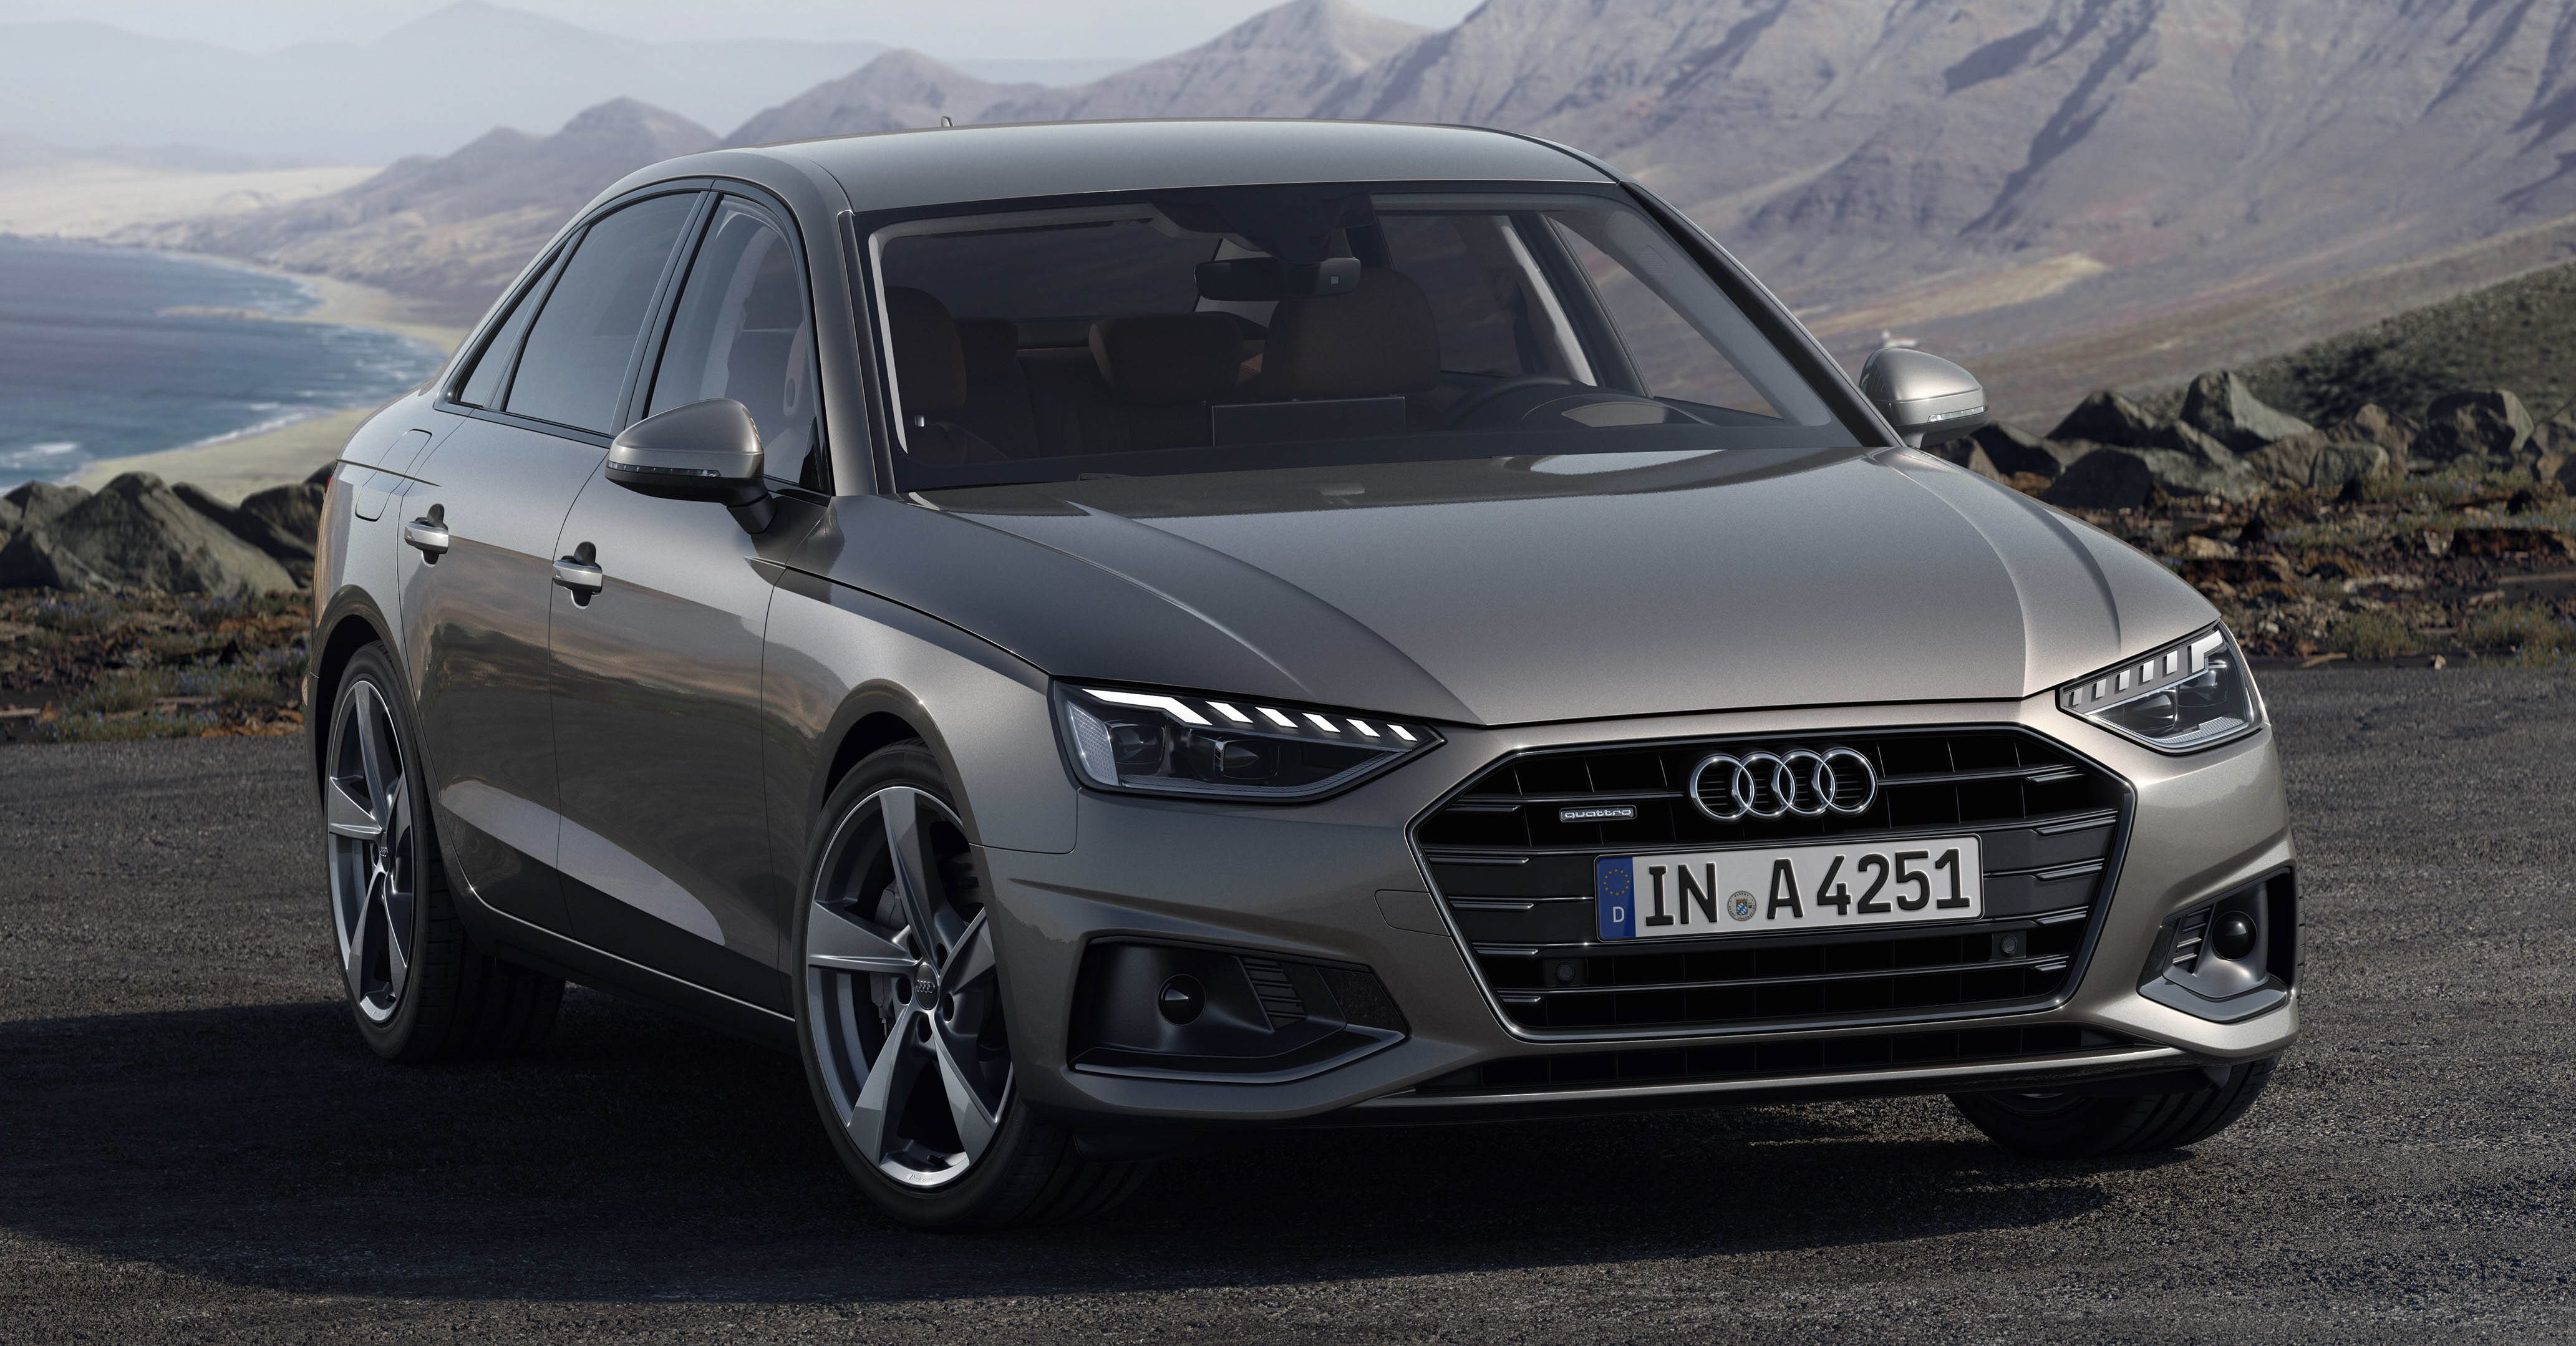 B9 Audi A4 gets a second facelift - revised styling and equipment